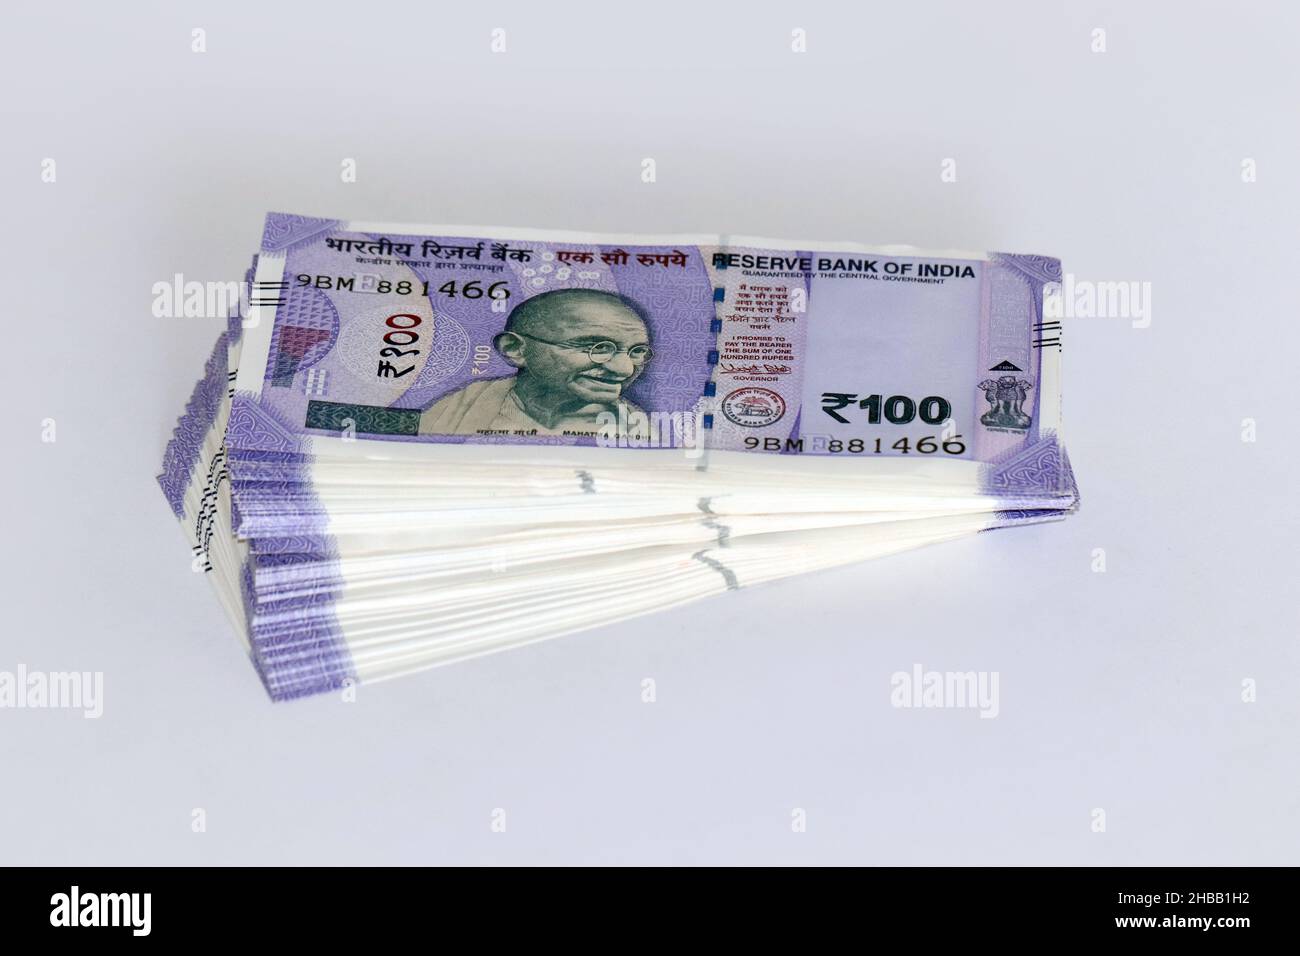 Stack of One hundred Indian rupee notes in white background, Indian currency bundle notes. Stock Photo